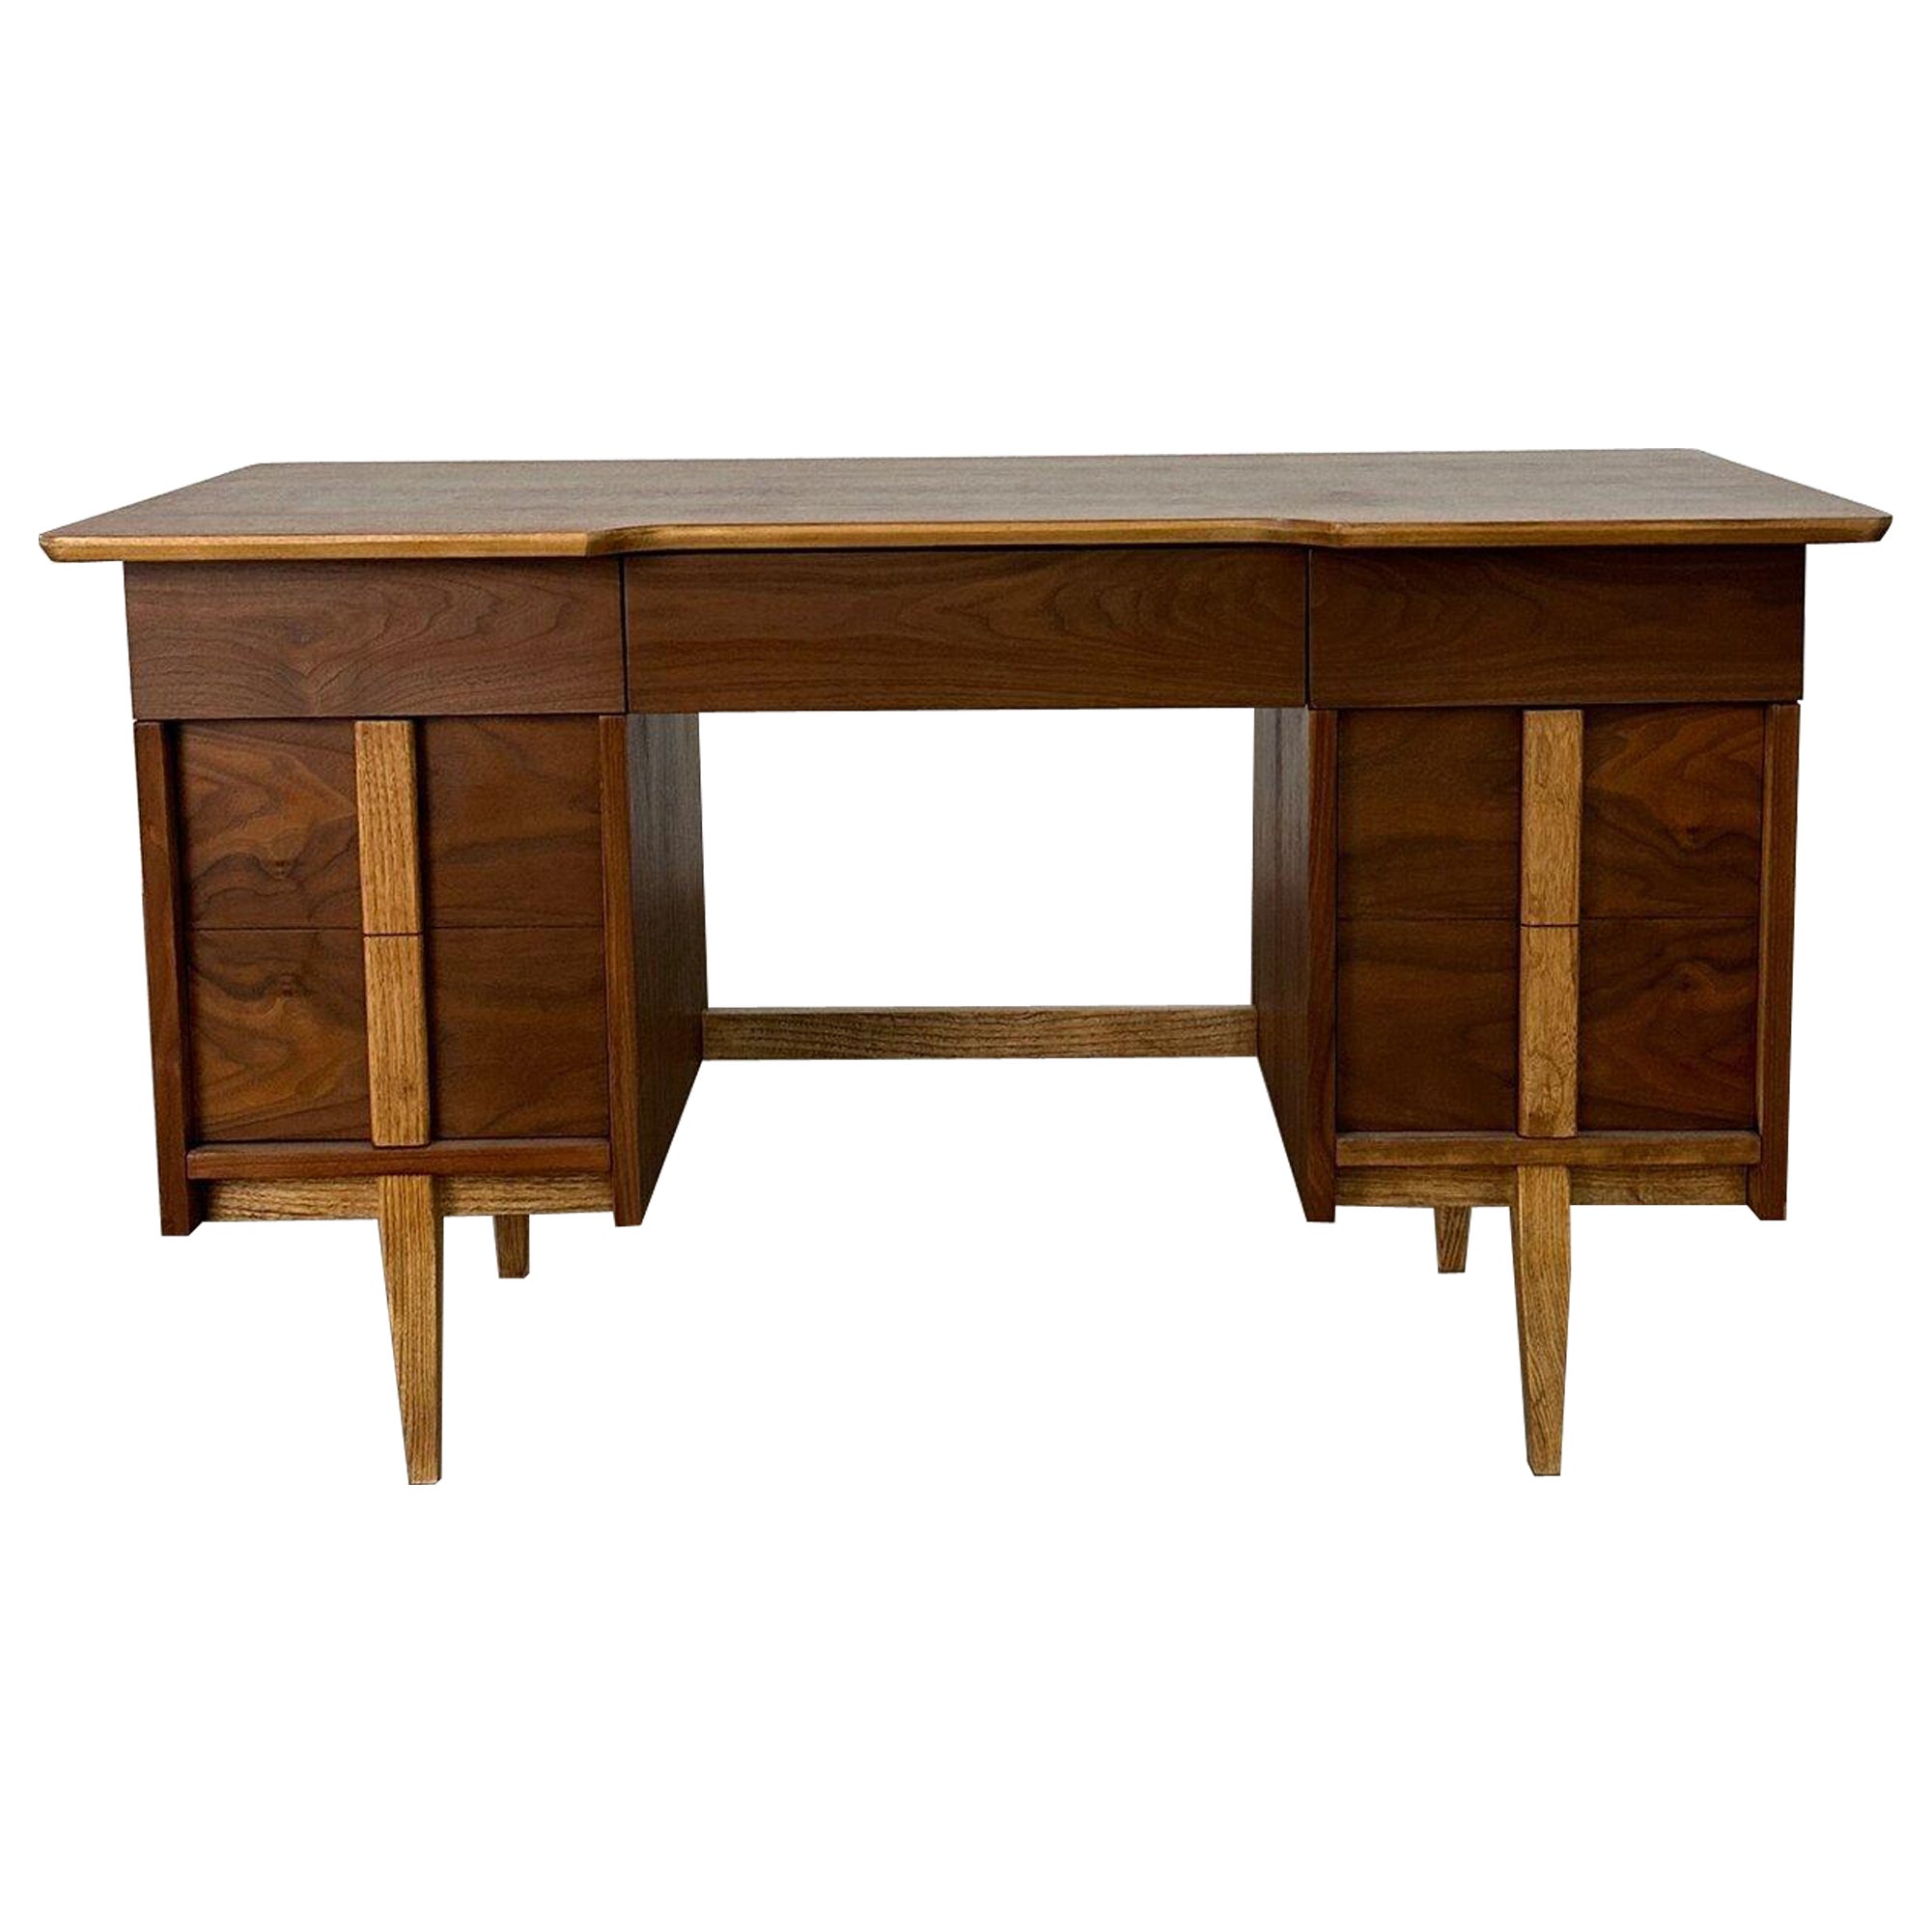 Two tone mid century desk For Sale